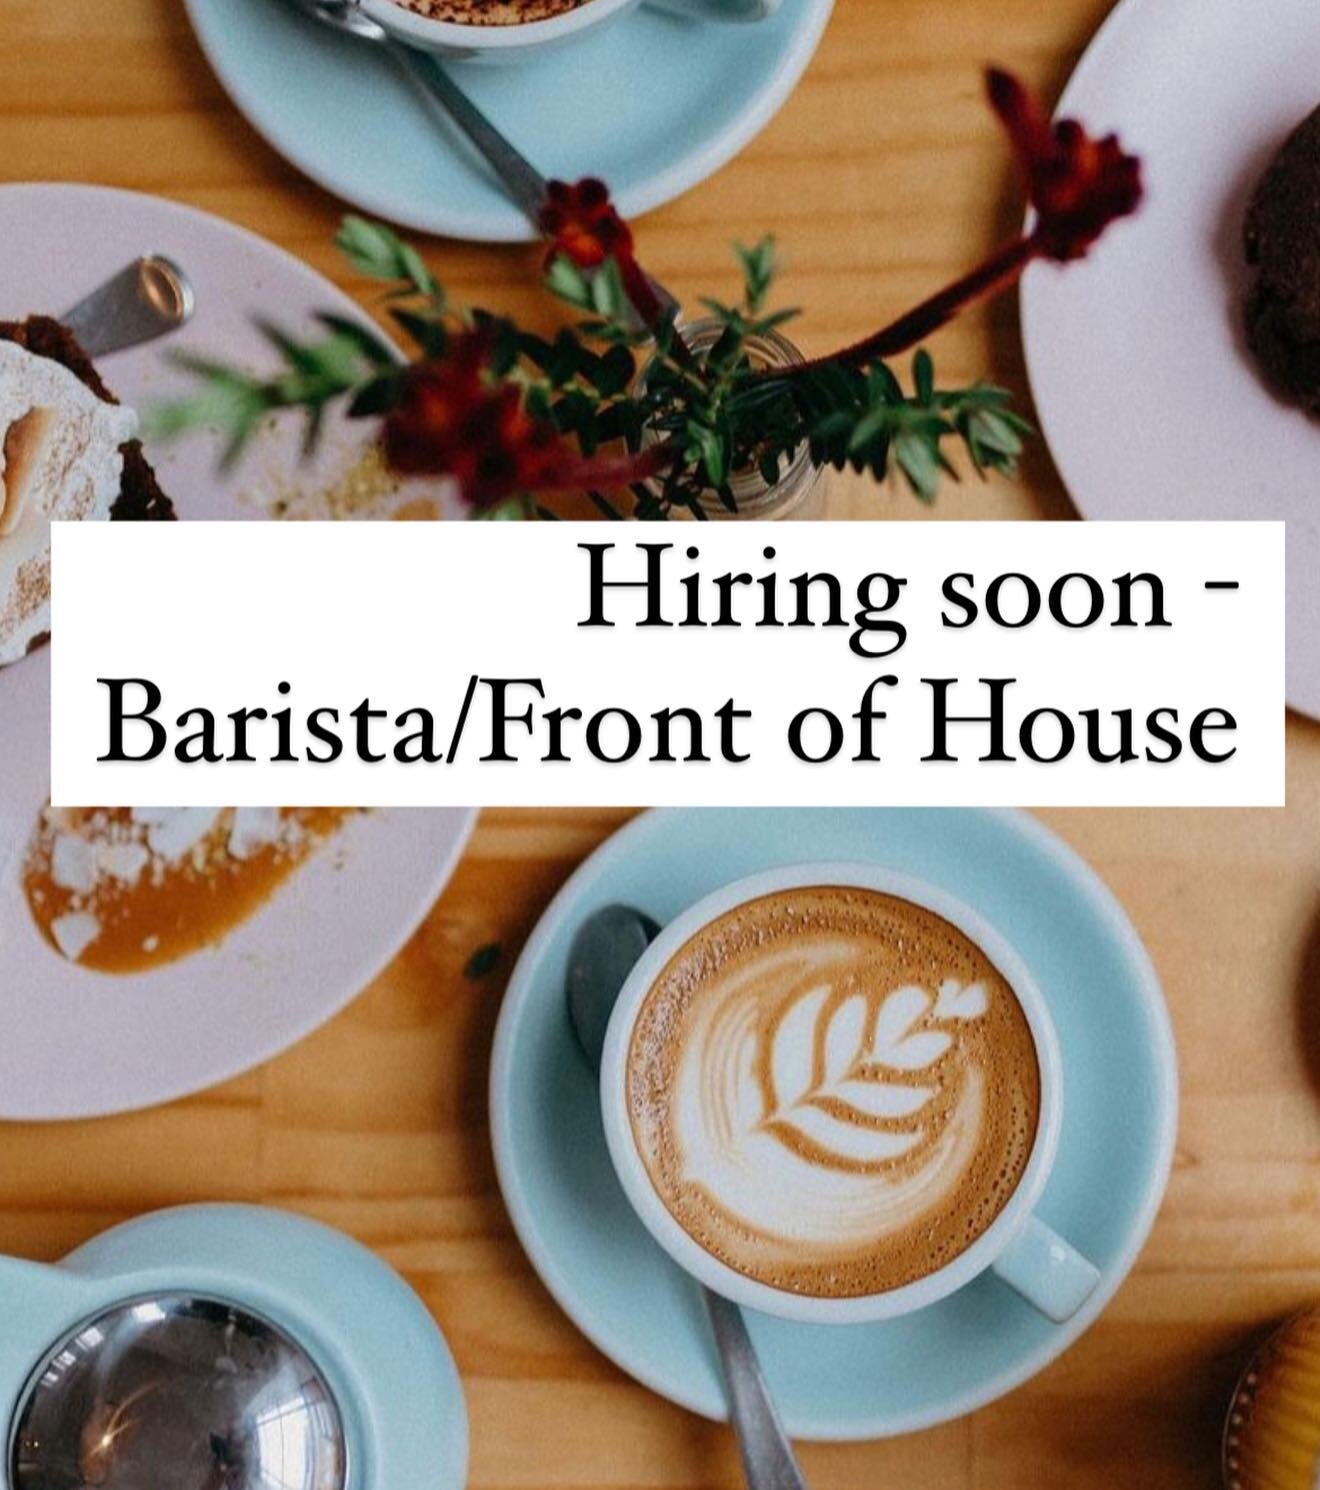 One of our baristas is heading away on overseas adventures next month - so we are preparing ahead and looking for someone new to step in. 

We are looking for someone with current coffee experience who also loves all aspects of front of house work to